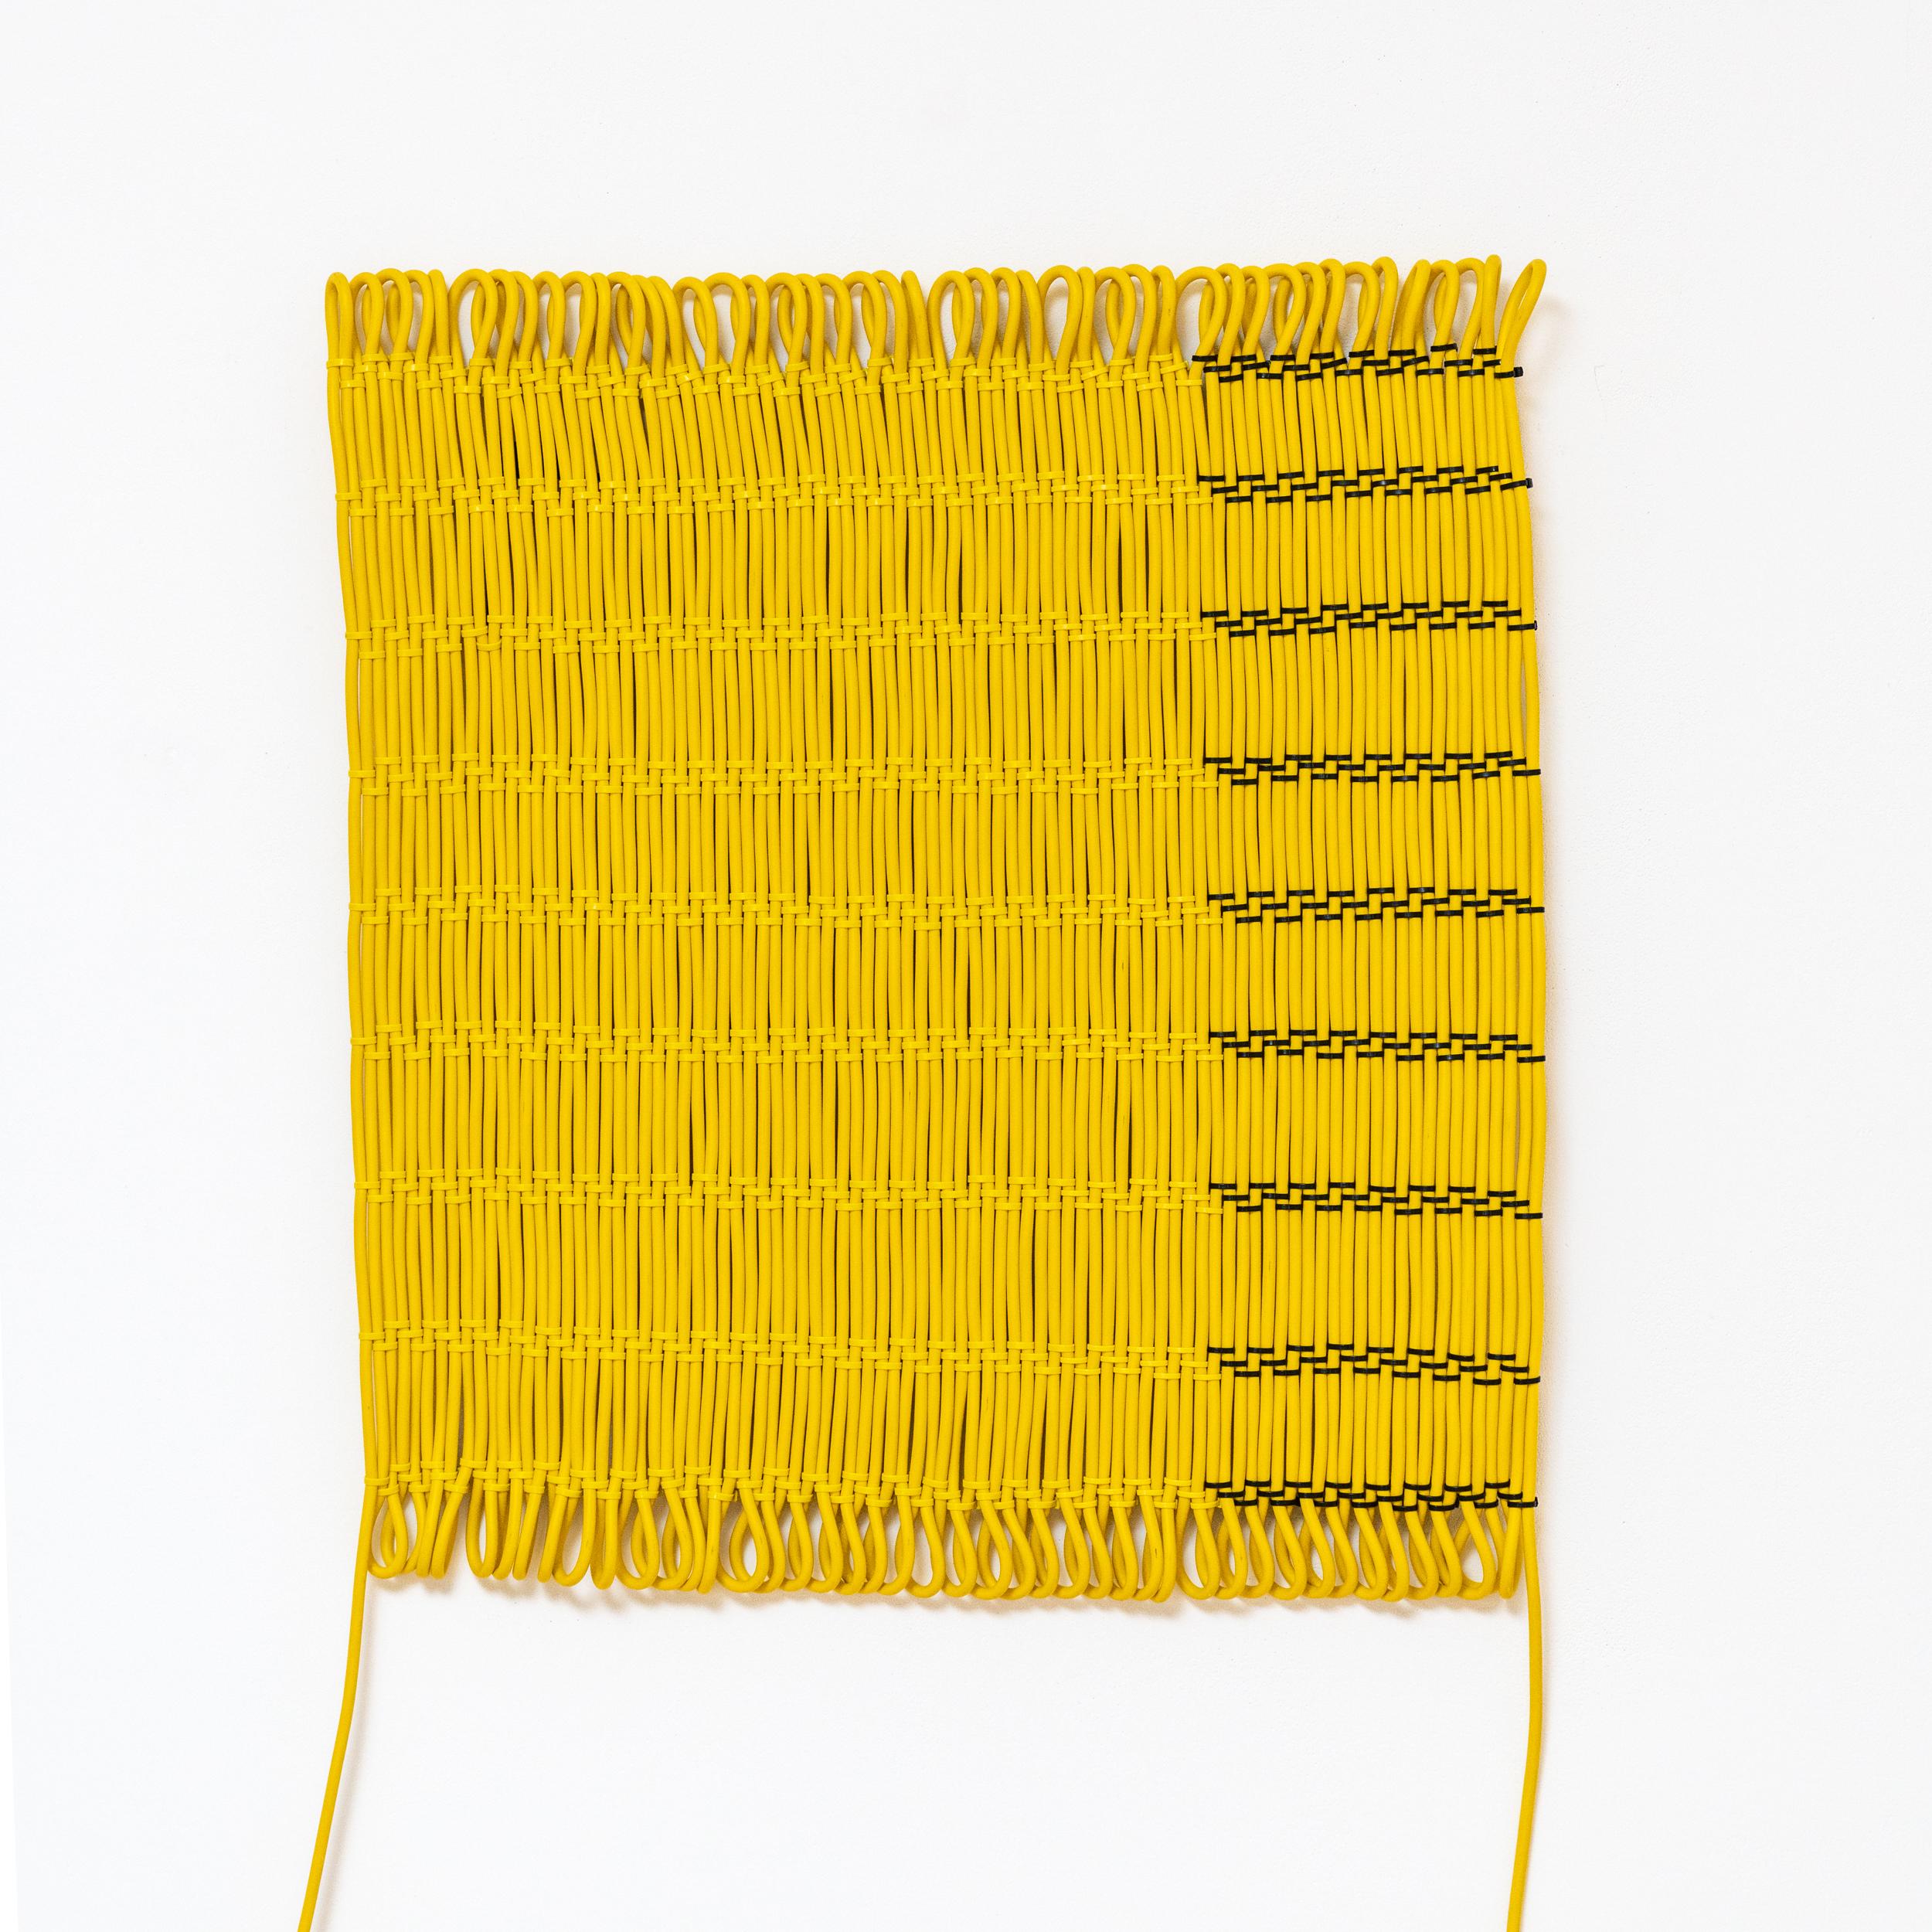 100 Meter Cable Wall rug by Tino Seubert
Dimensions: W 79 x L 102 cm or W 64 x L 130 cm (˜ 0.83 m2 surface).
Materials: PVC electricity cable, cable clips, country specific plug and socket.
Cable colours: black, yellow, orange, blue. 

Tino